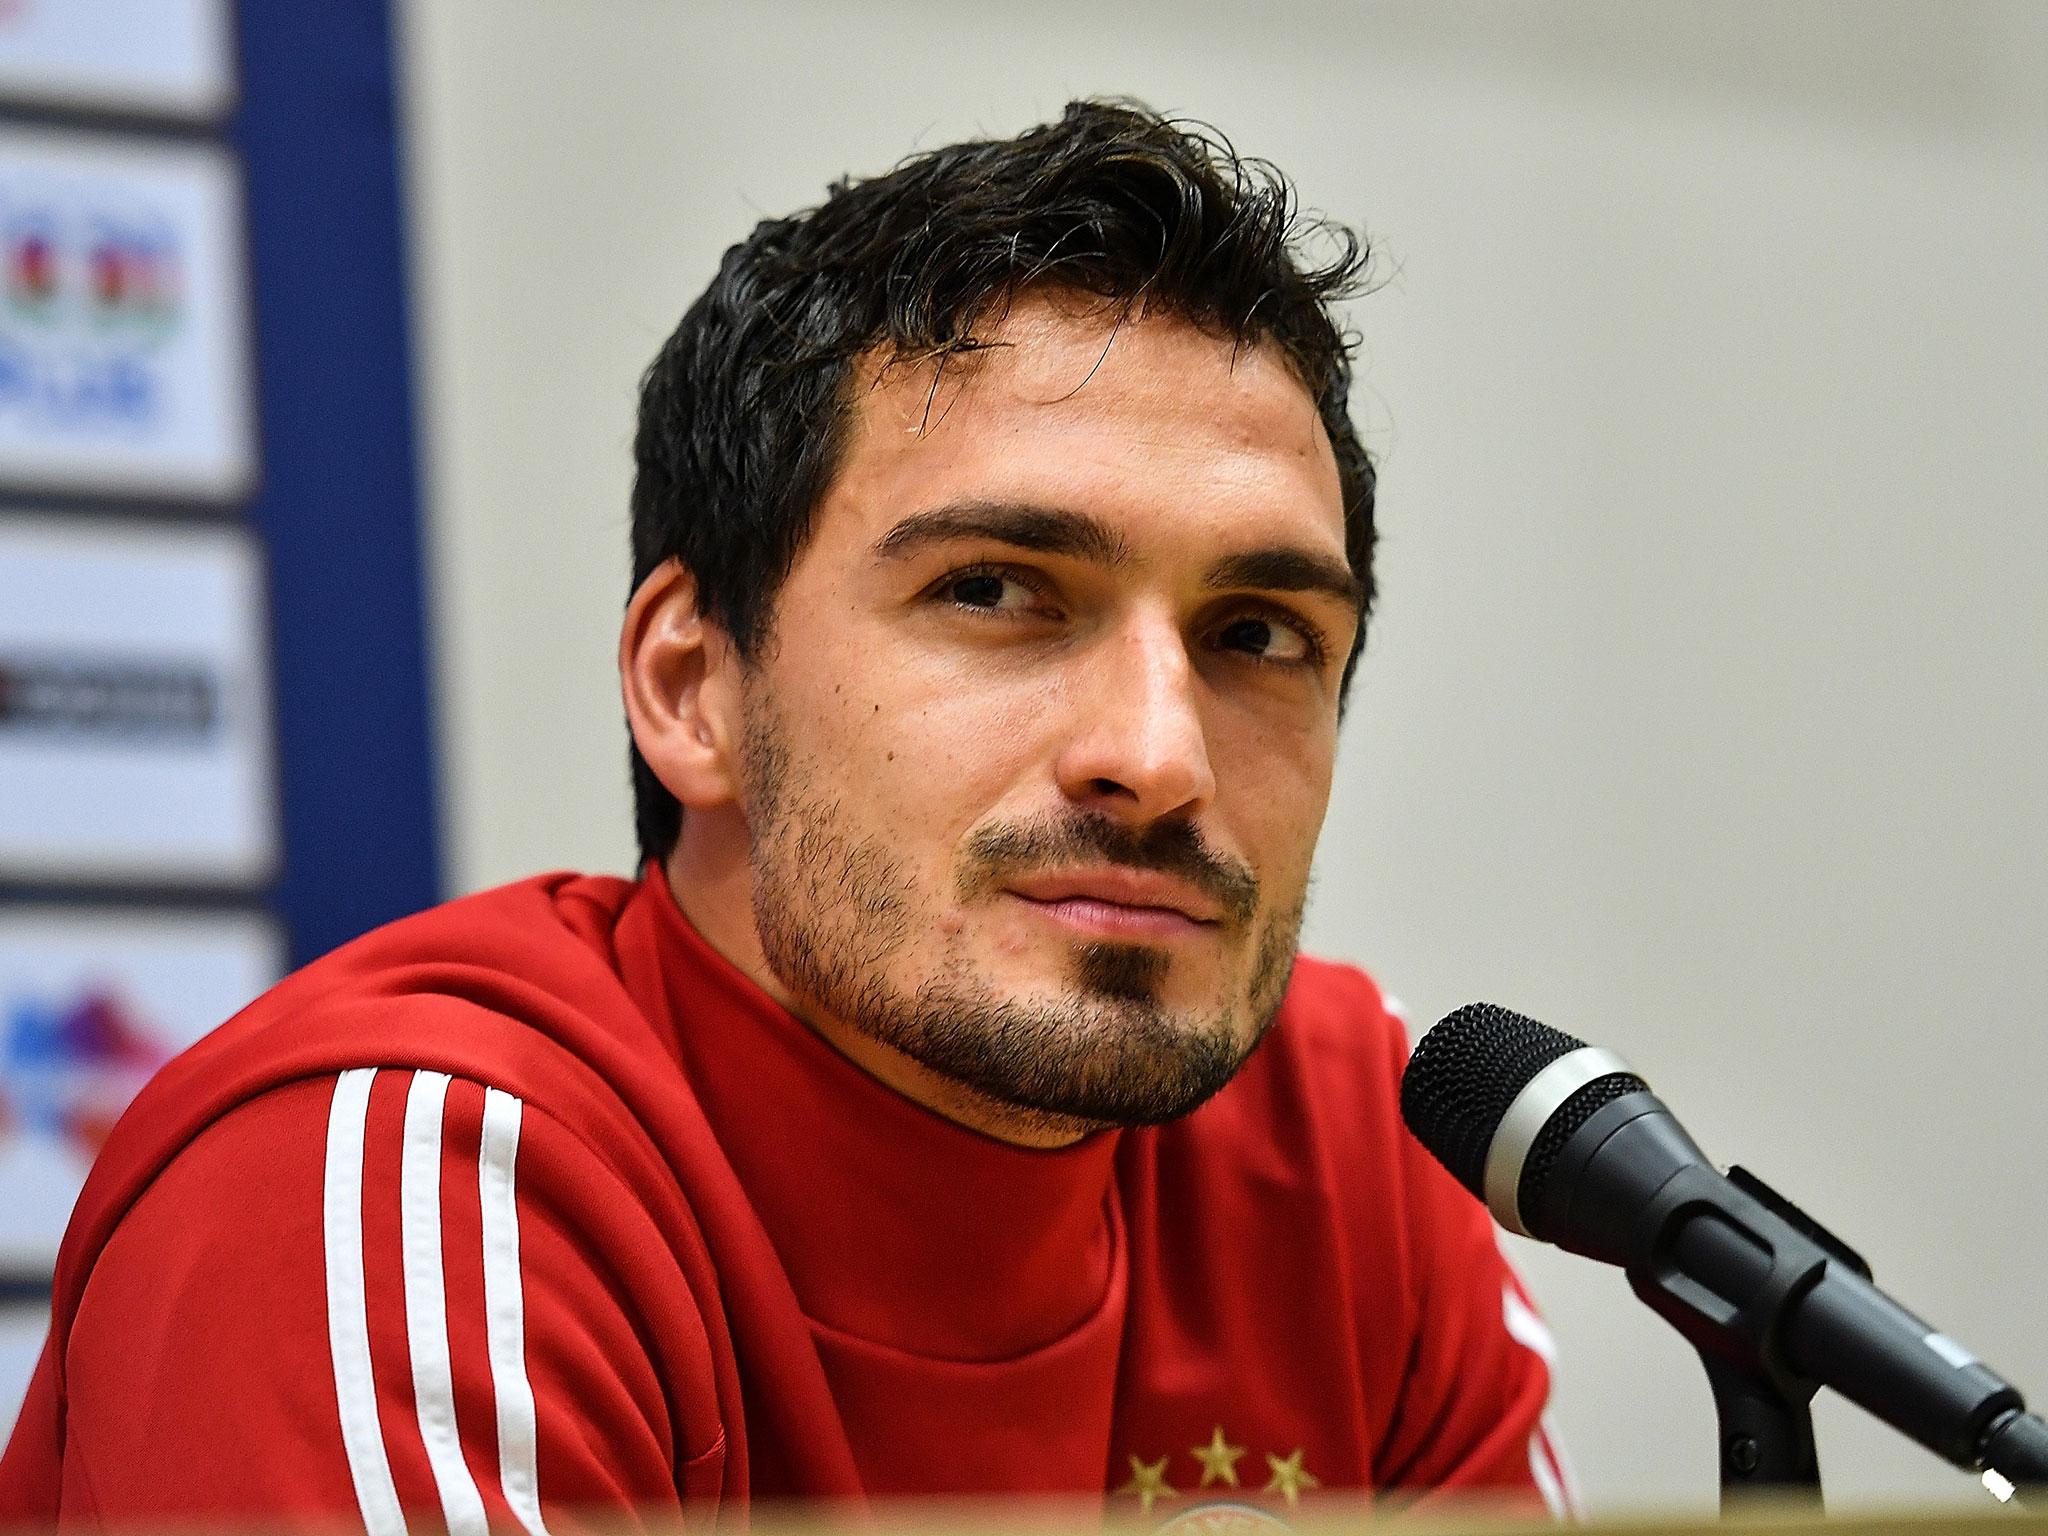 Like Mata, Hummels has challenged his peers to make the pledge for themselves